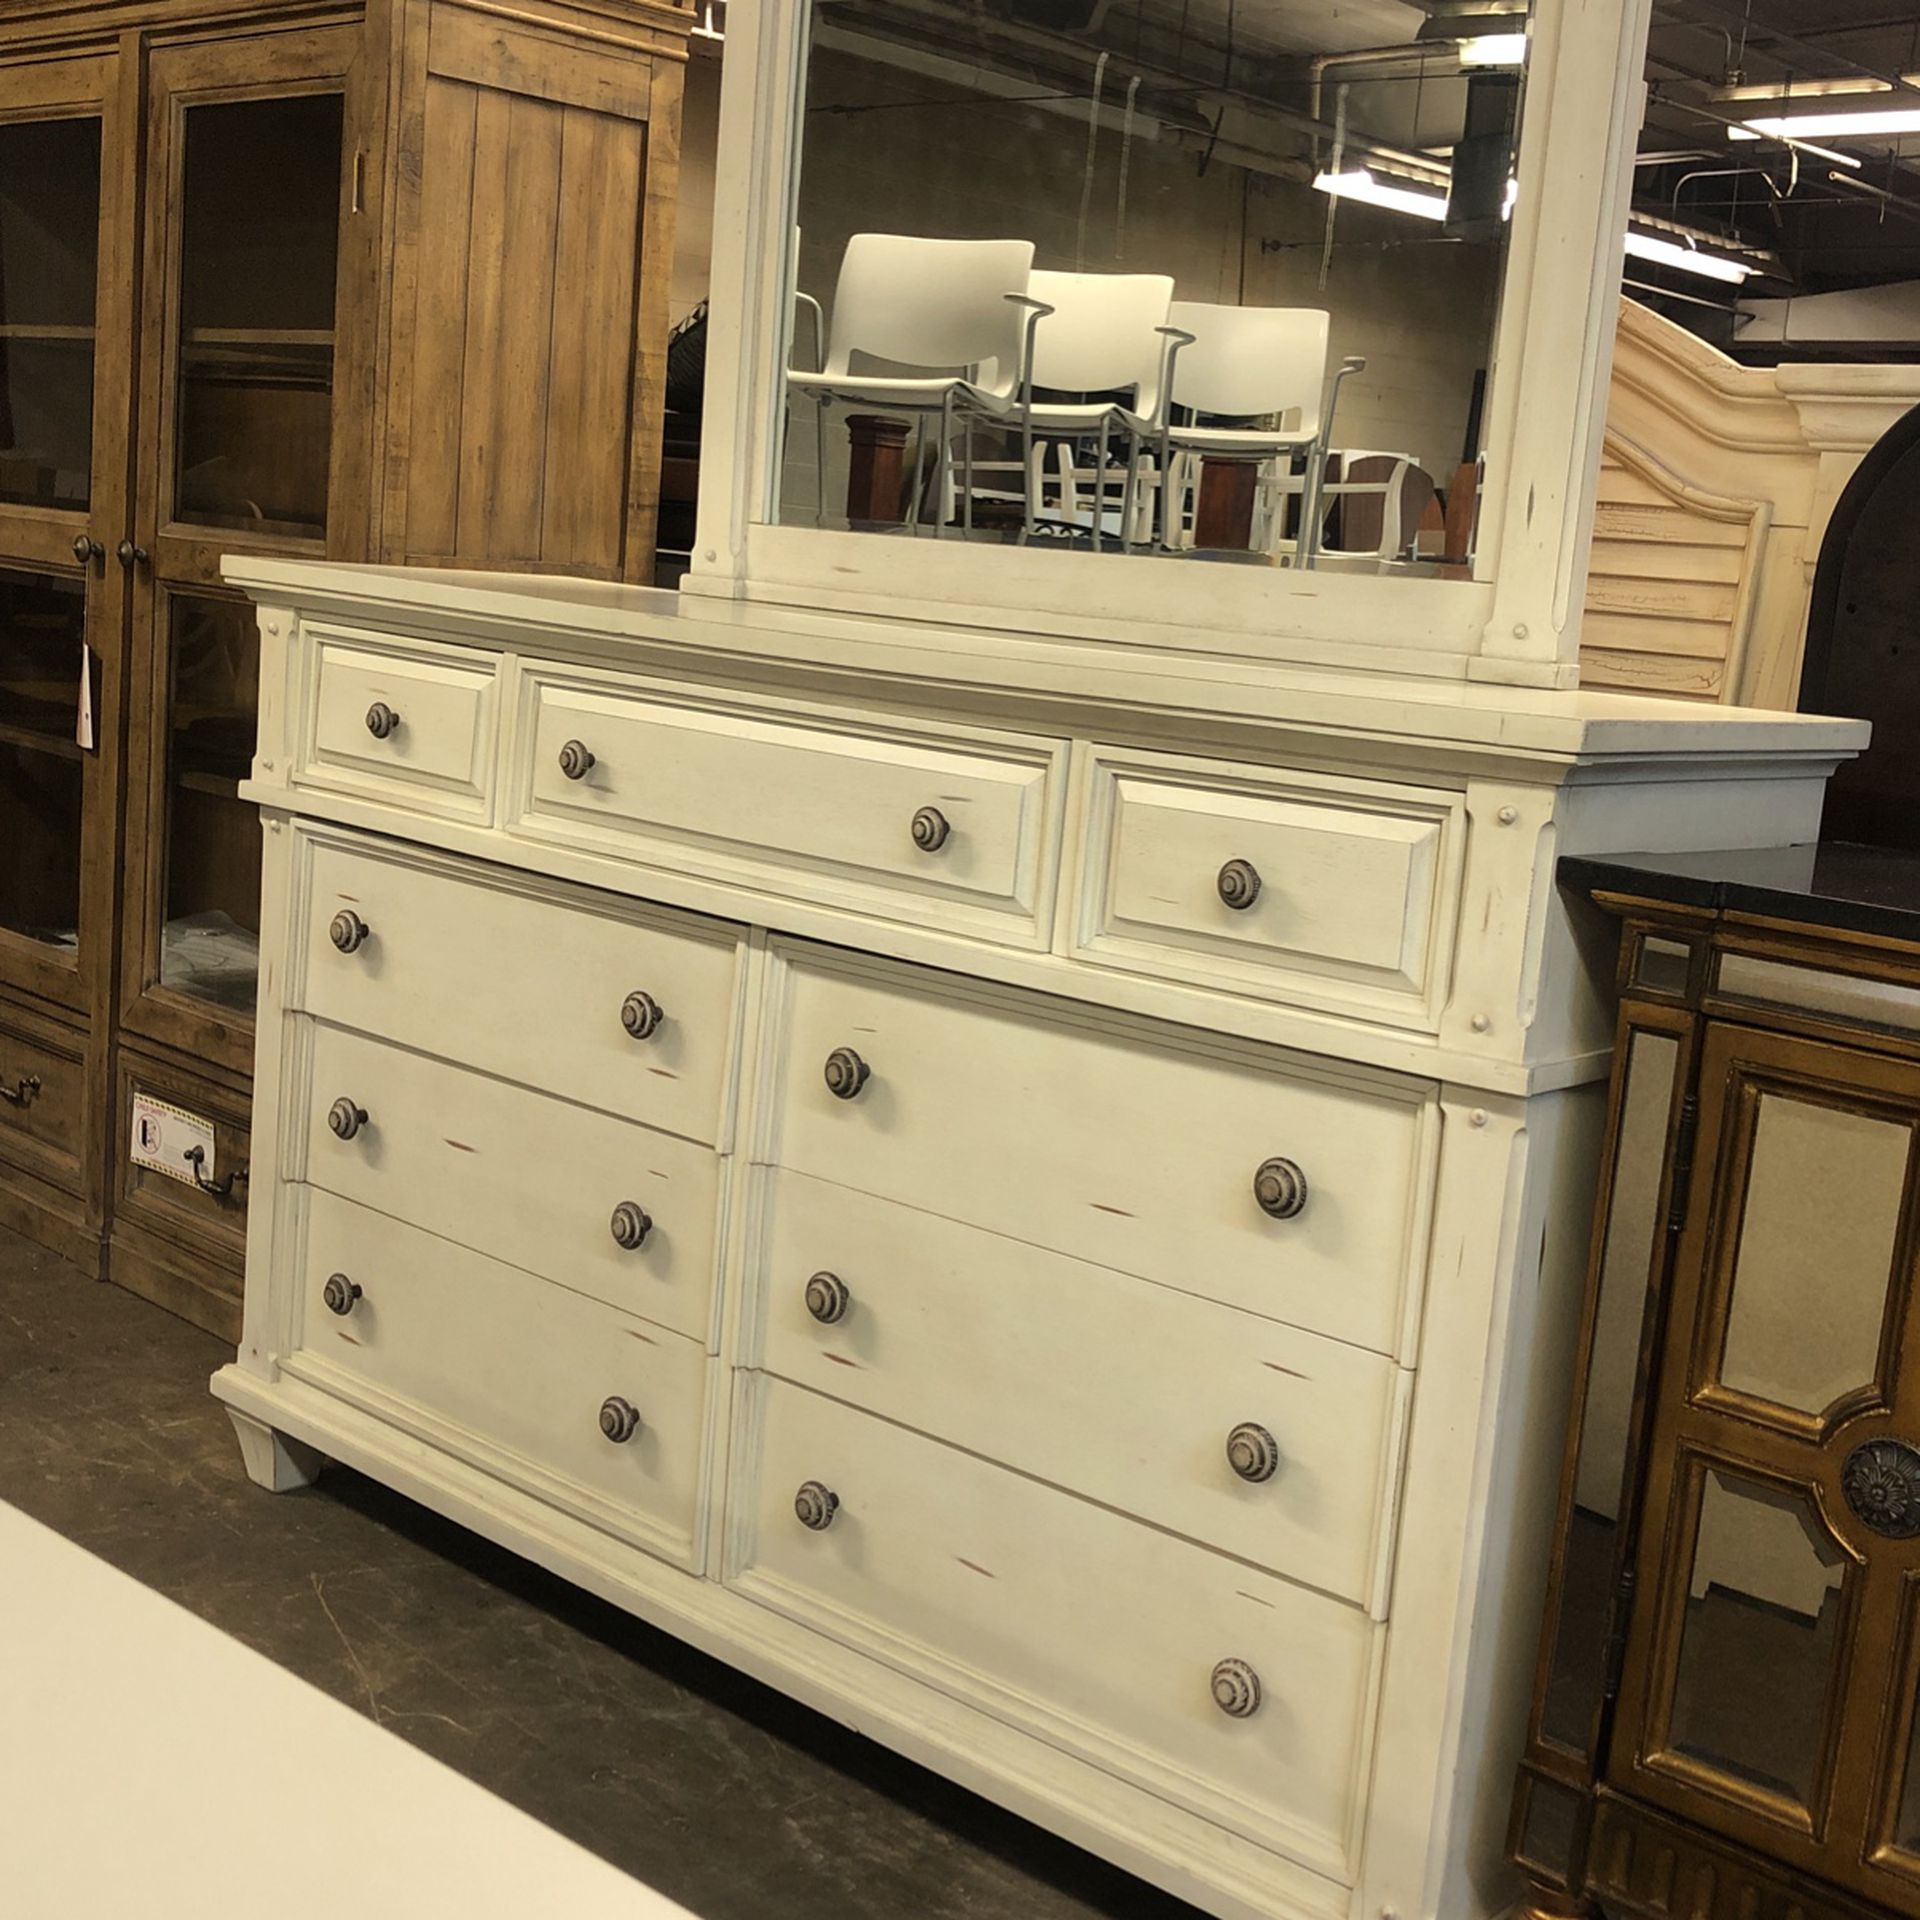  Queen size white headboard And dresser White distressed